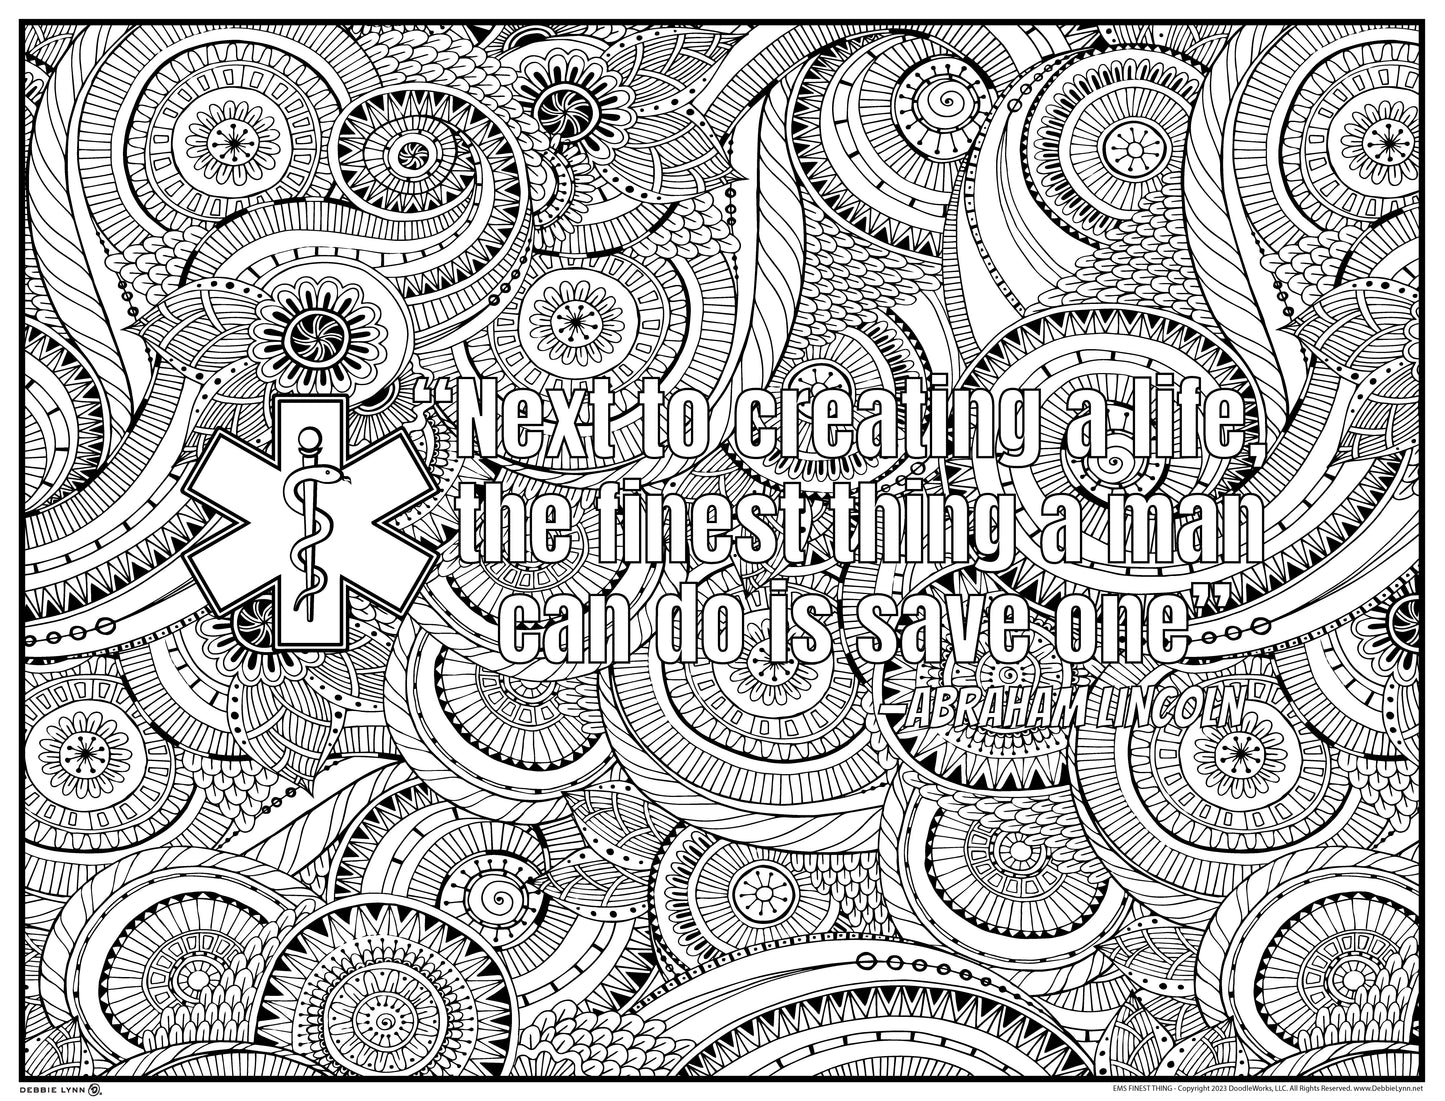 EMS Saving Lives Personalized Giant Coloring Poster 46" x 60"